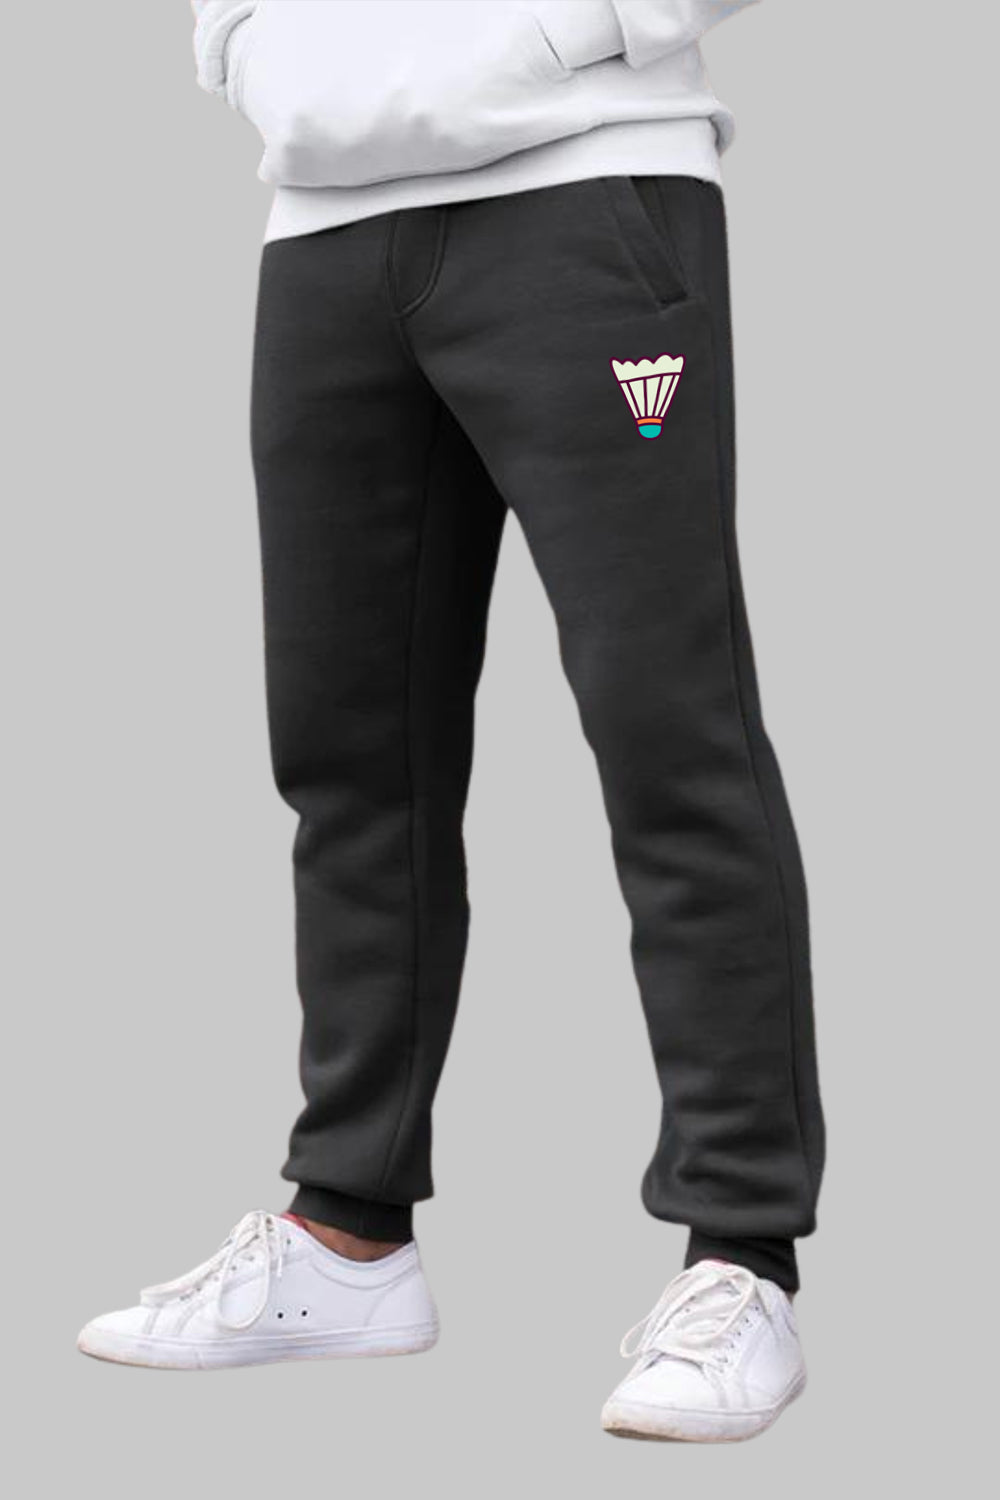 Shuttlecock Graphic Printed Black Joggers